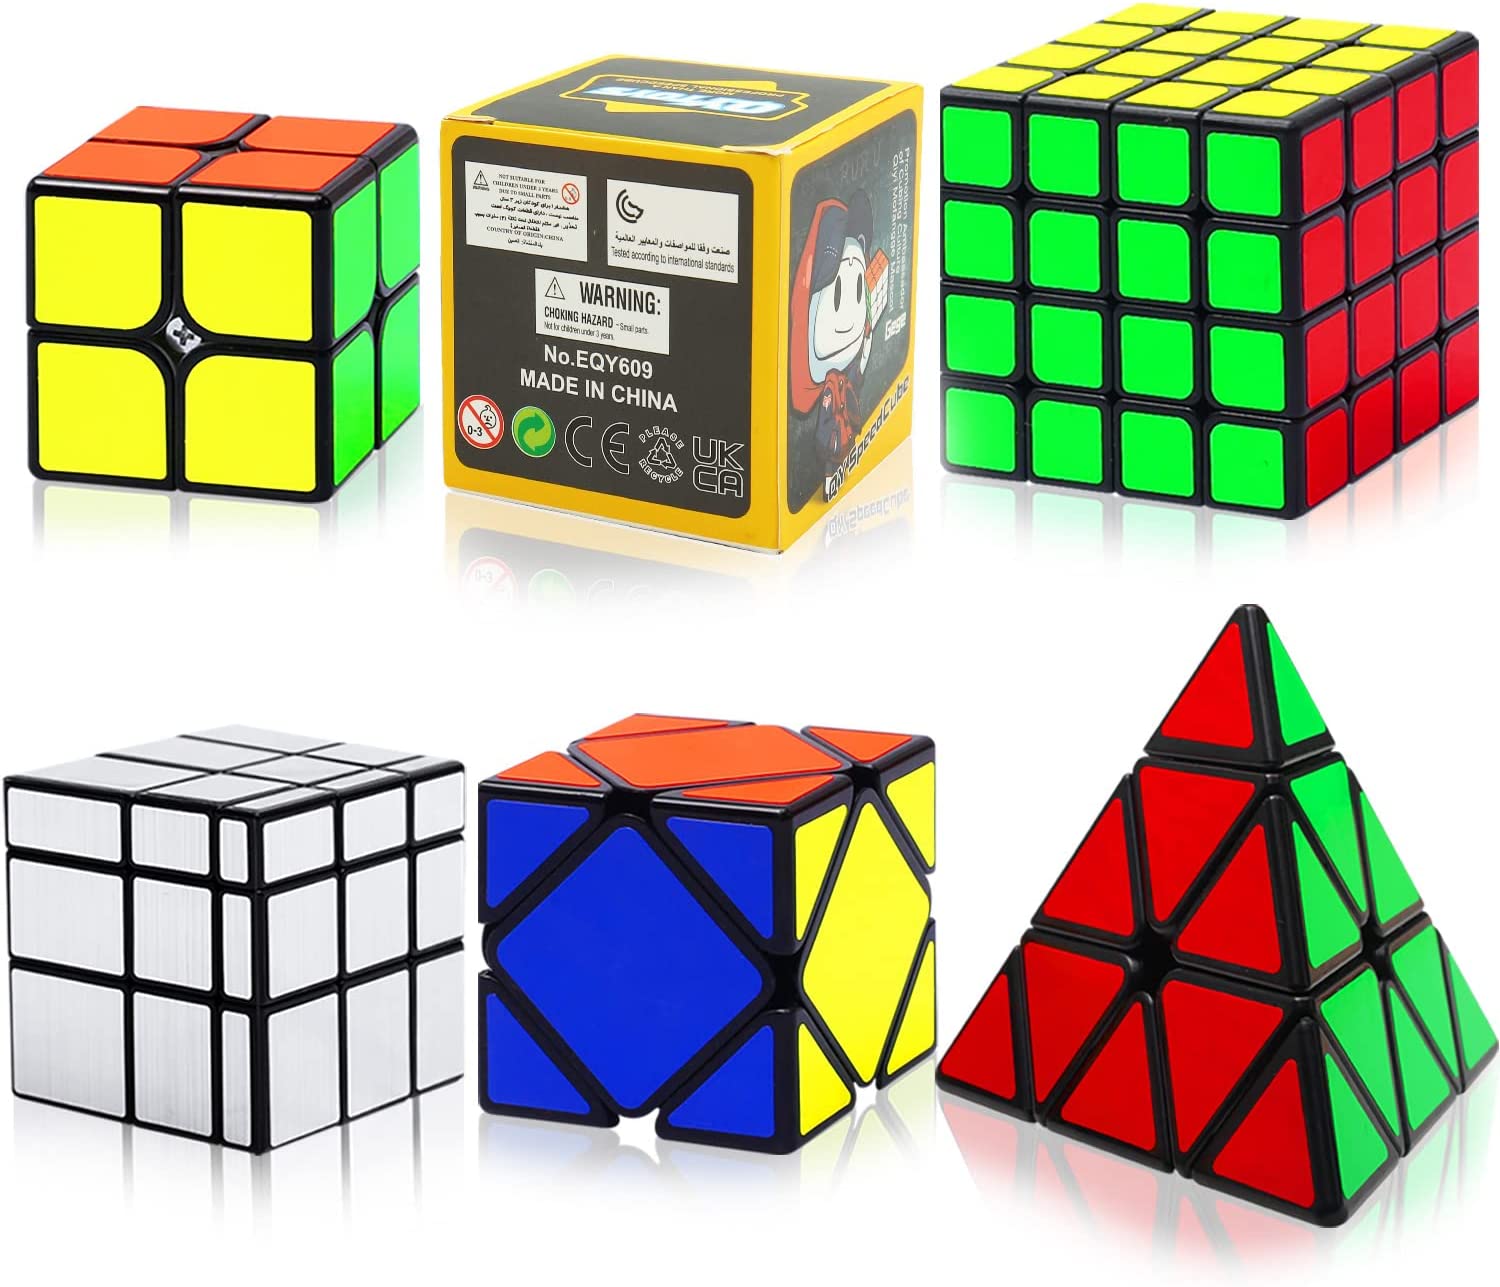 4 Pcs Magic Cubes Bundle 2x2 3x3 Pyramid and Skewb Speed Puzzle Set Toy for Kids 